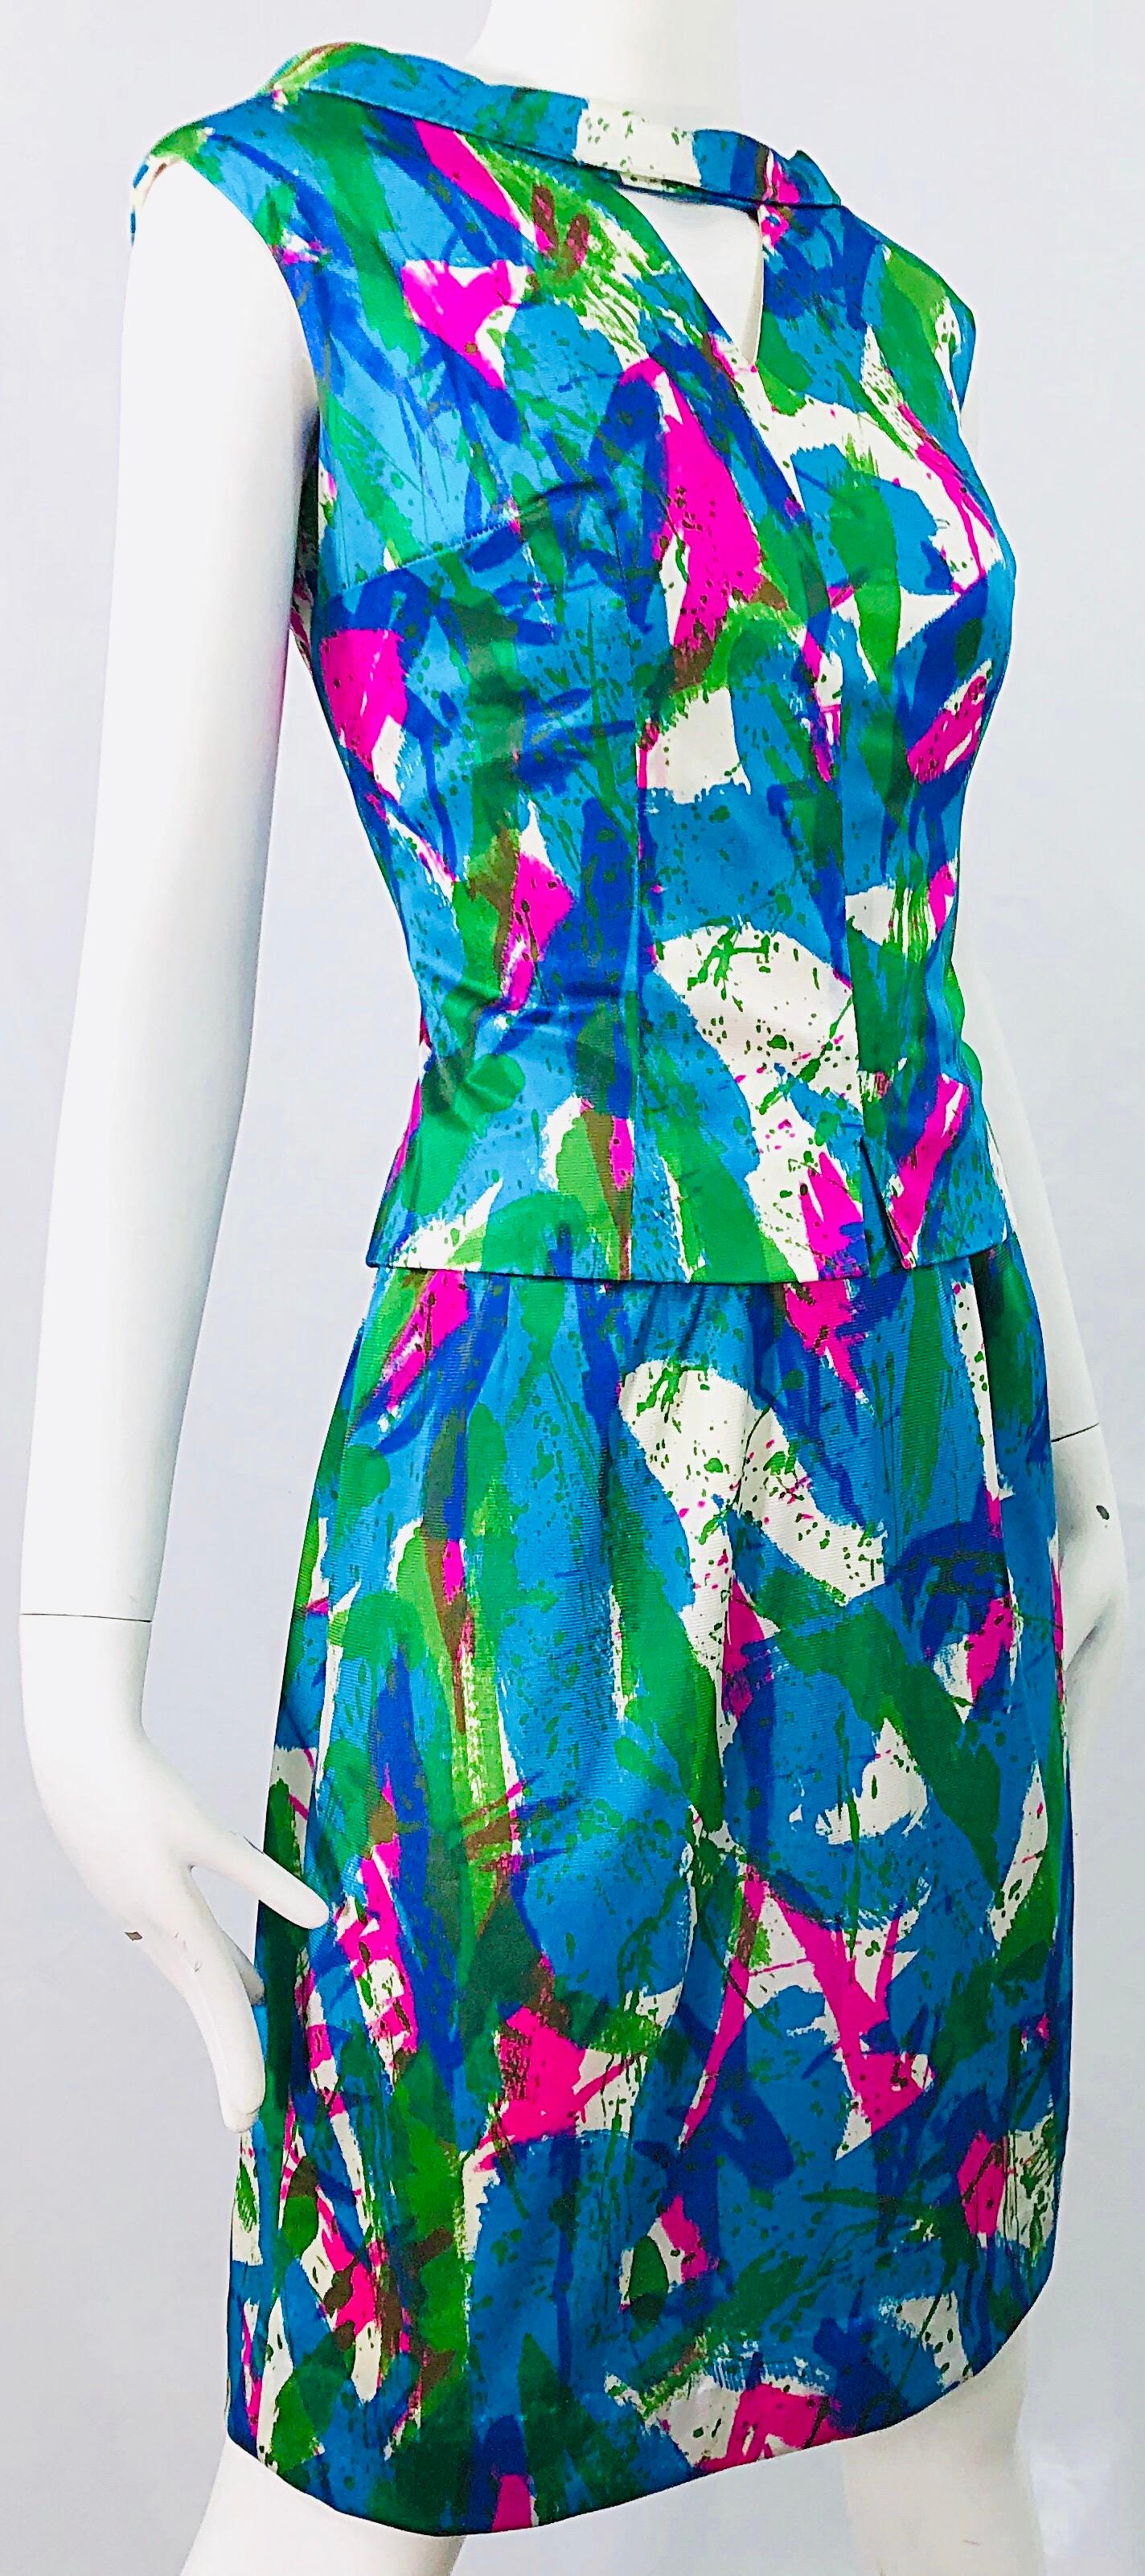 Women's Chic 1960s Neon Abstract Print Two Piece Vintage 60s Sheath Dress + Top Blouse  For Sale